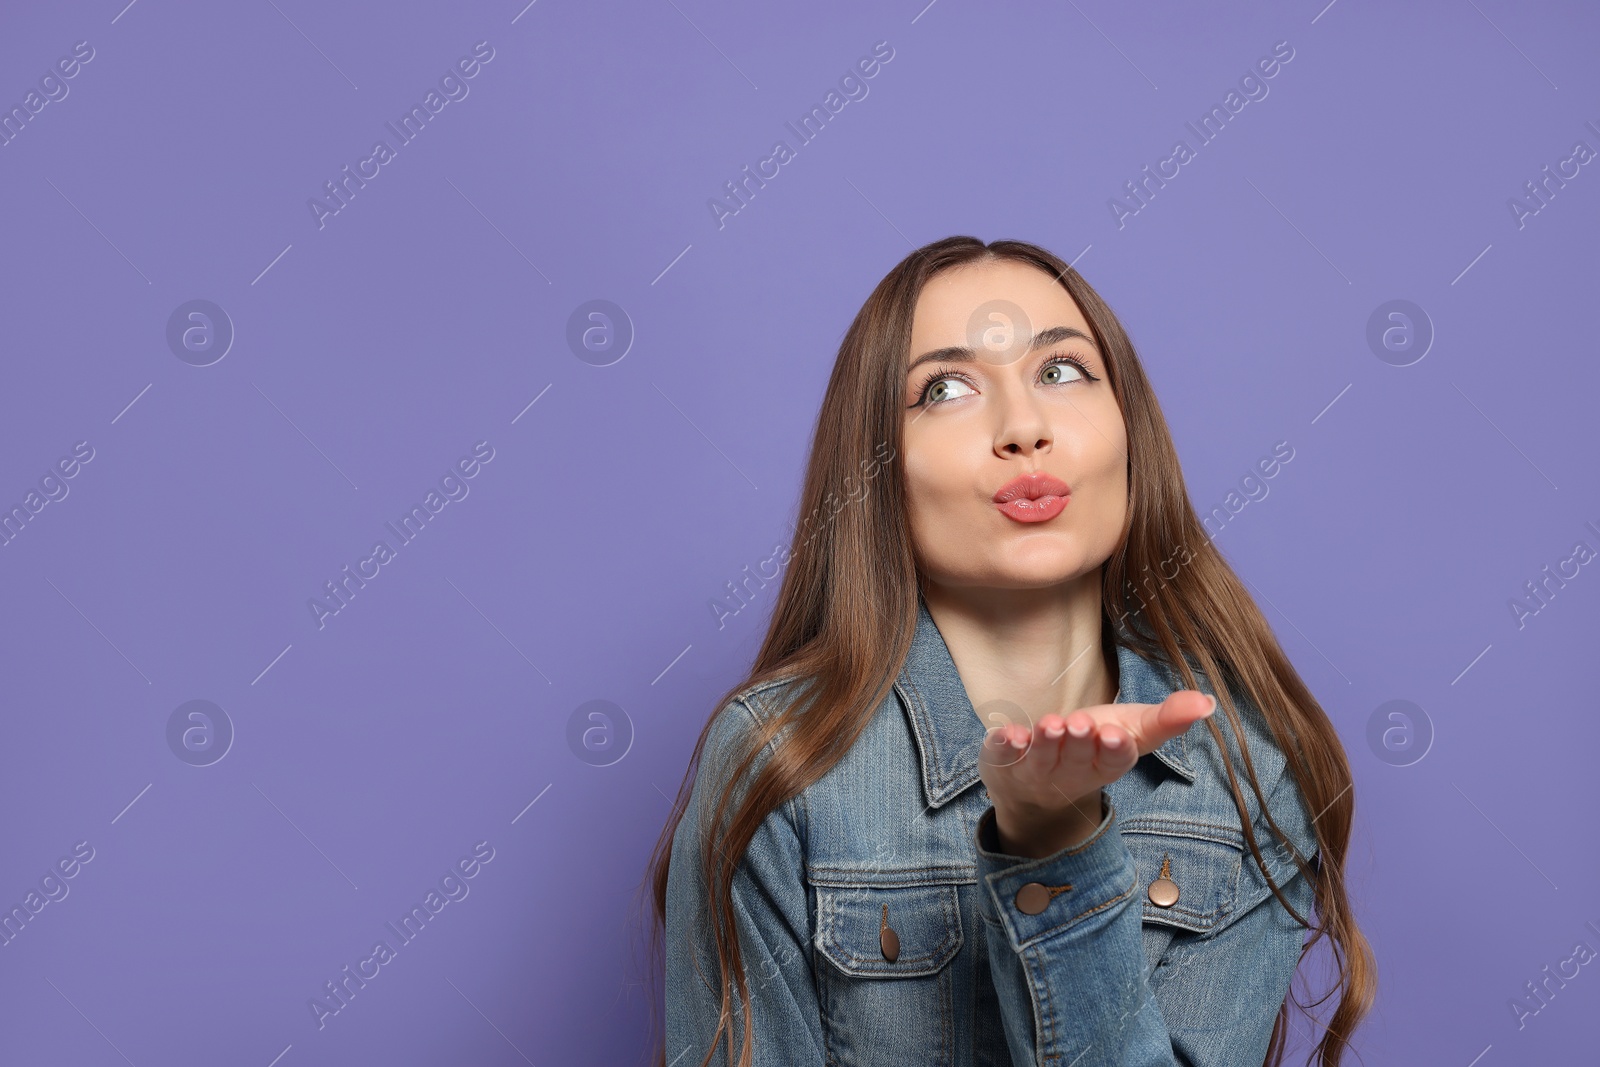 Photo of Beautiful young woman blowing kiss on purple background, space for text